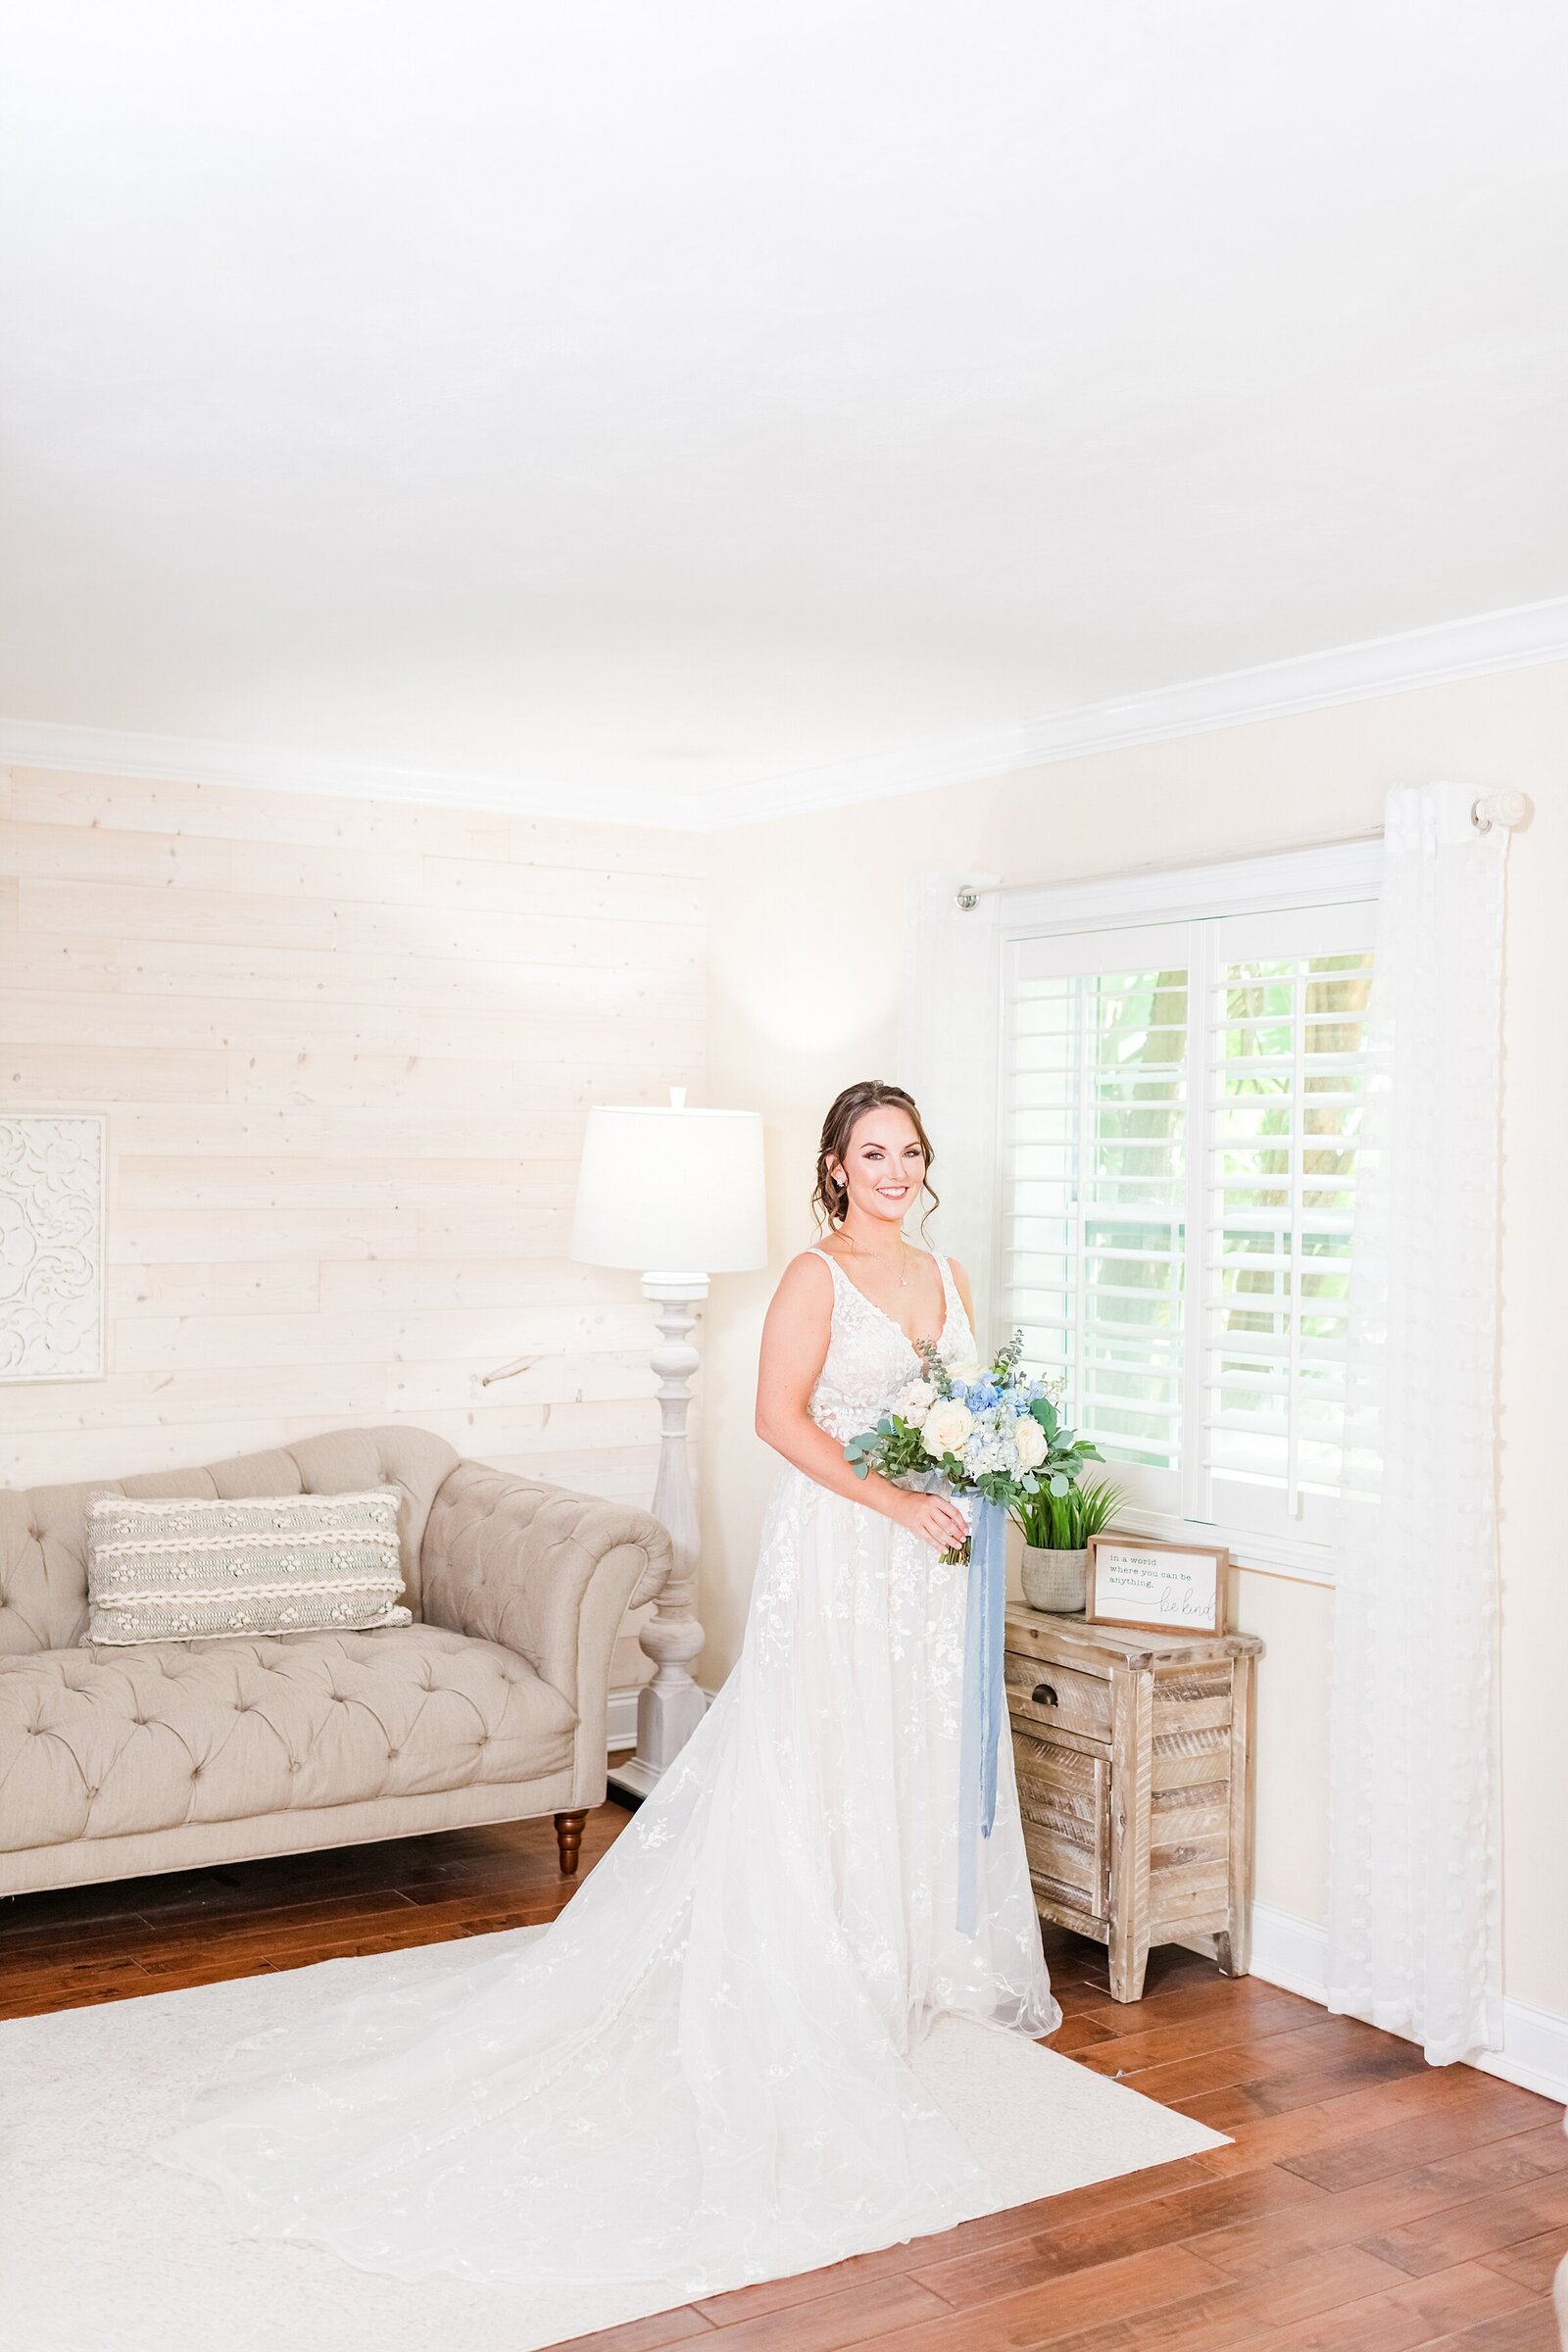 Bride with Wedding Bouquet | The Delamater House Wedding | Chynna Pacheco Photography-165